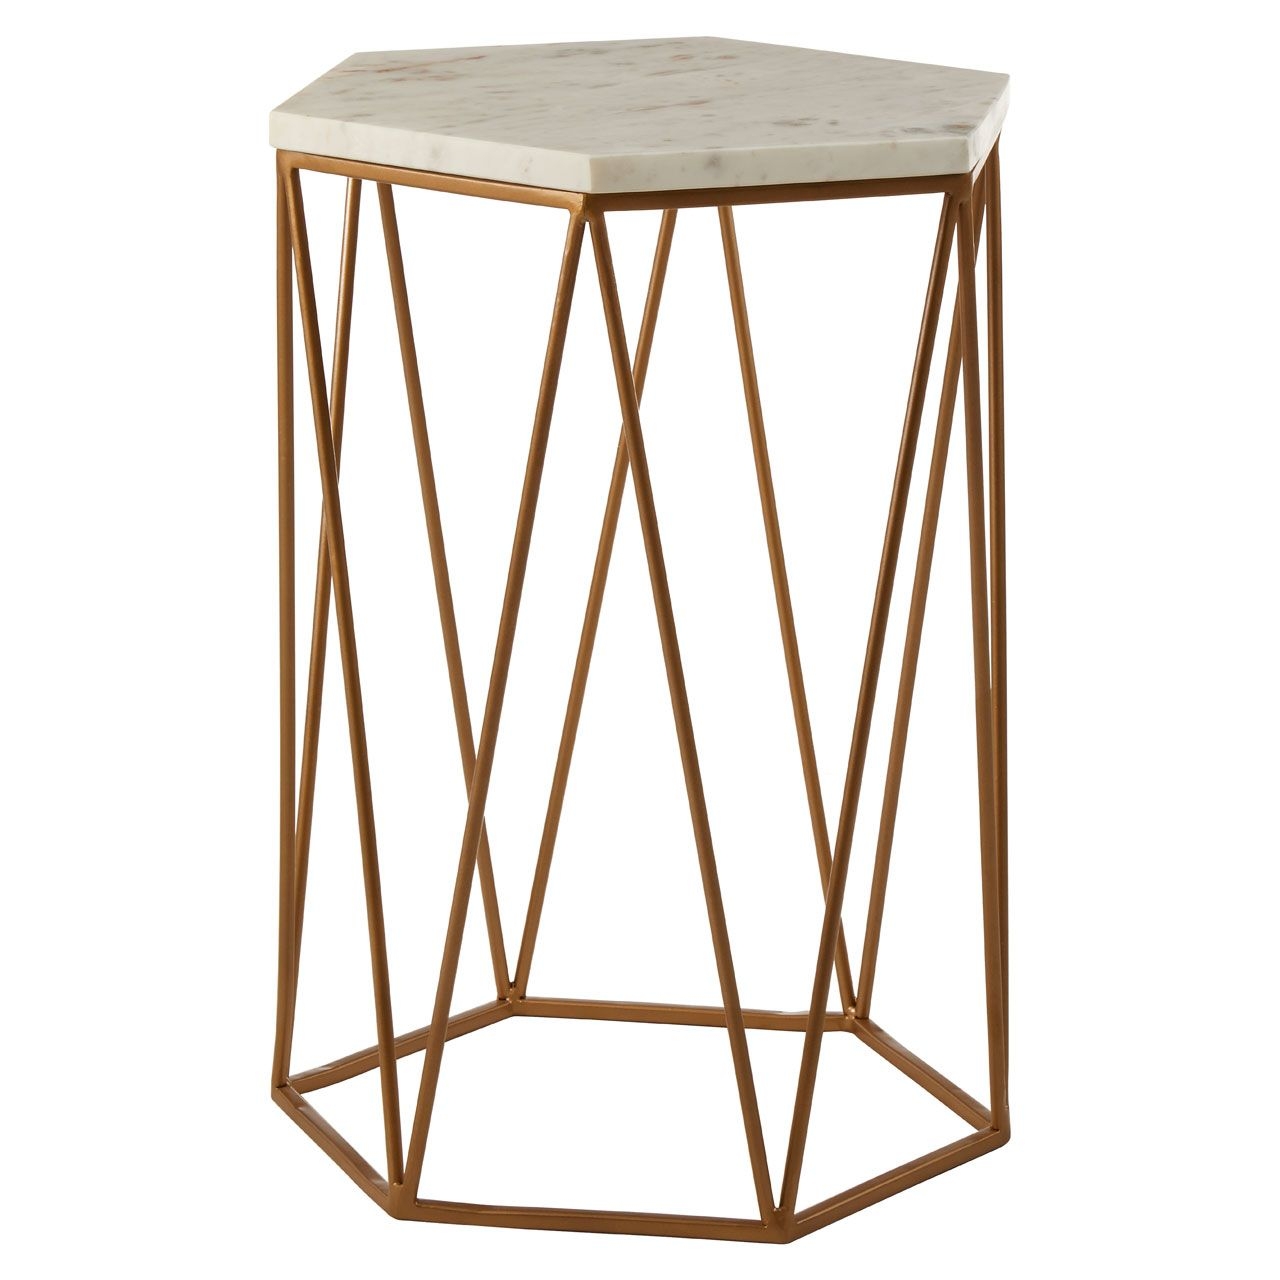 Shalimar Hexagonal Marble Top Side Table With Brass Metal Frame